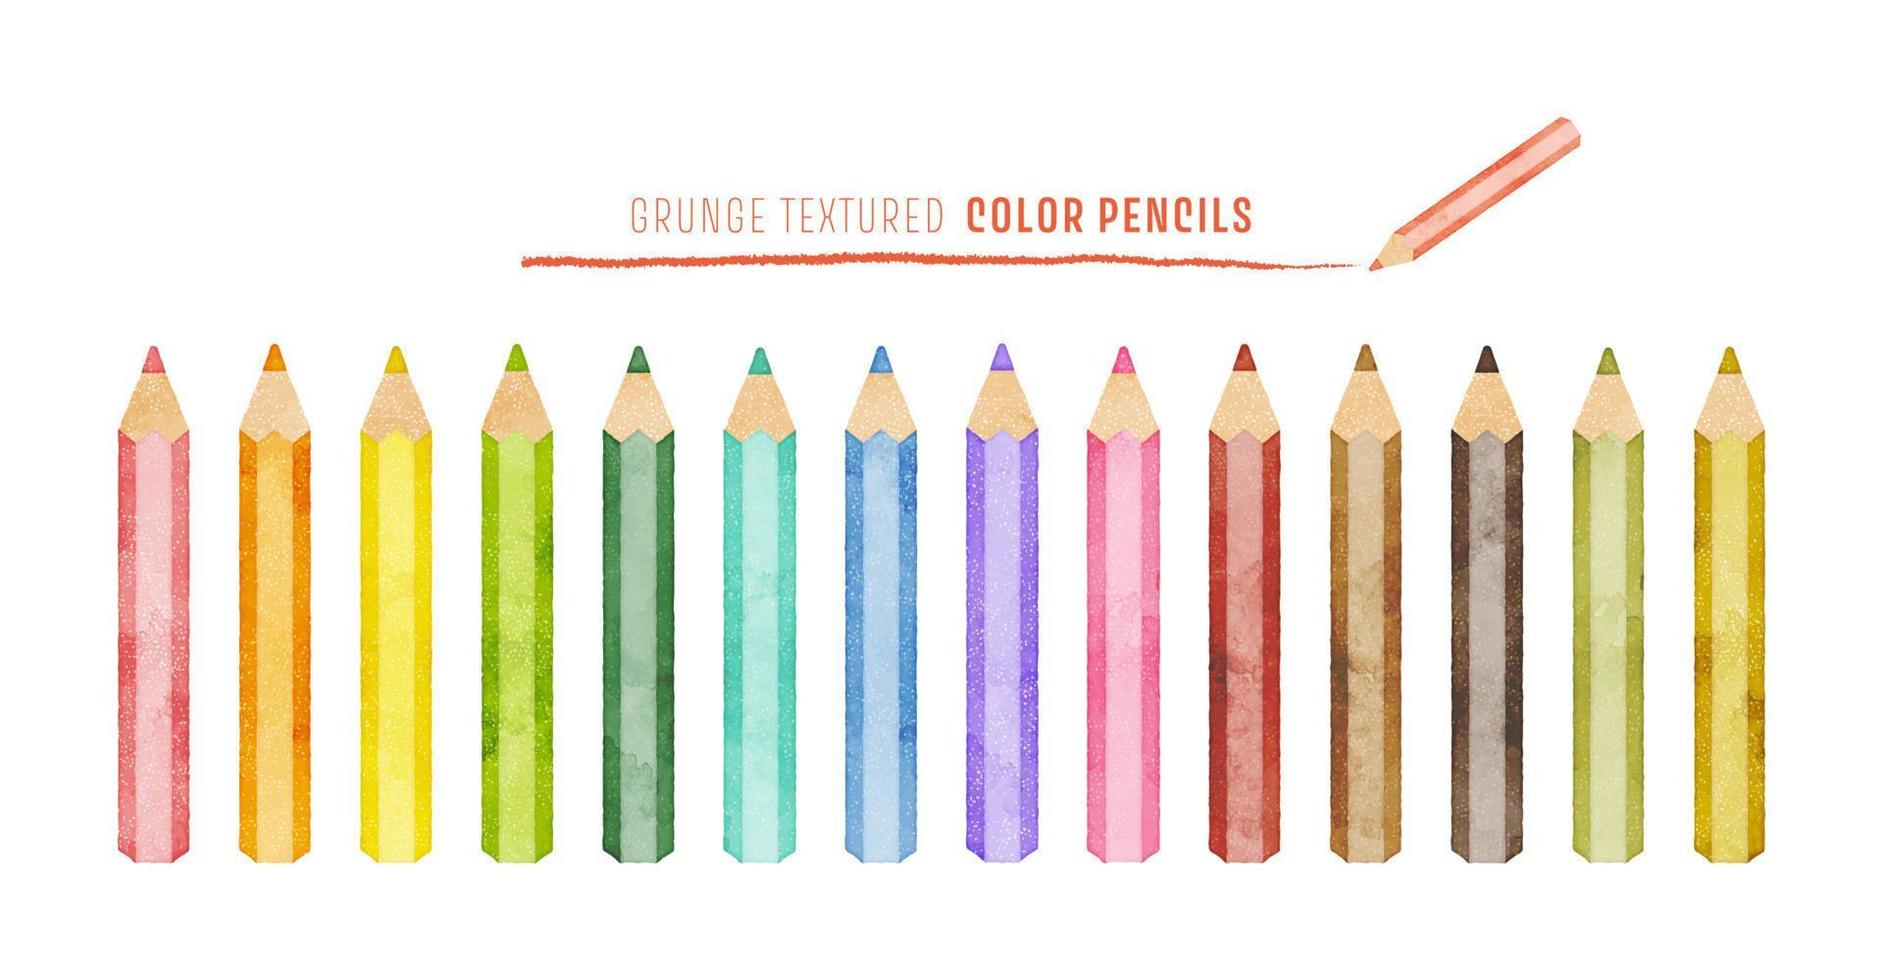 watercolor pencils illustration on white background vector